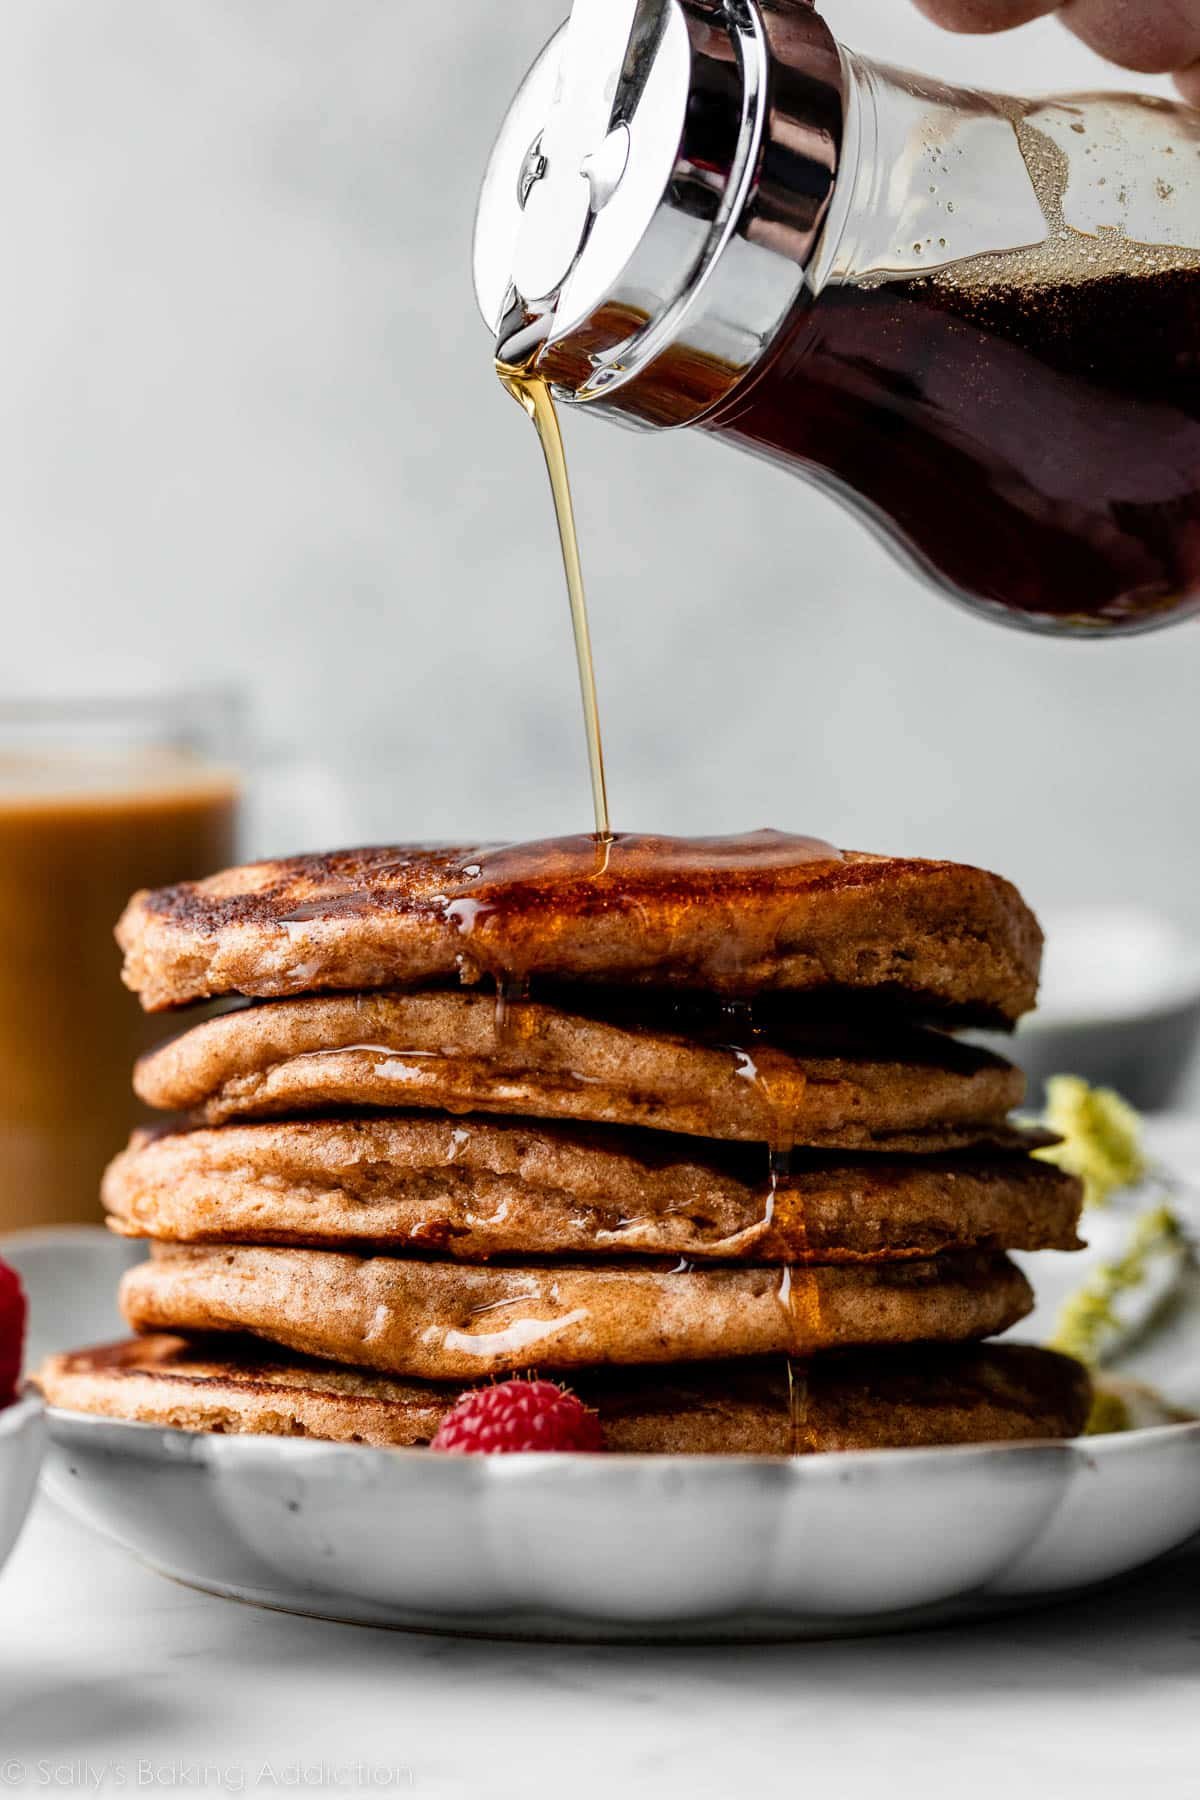 maple syrup being poured on a stack of pancakes on gray plate.